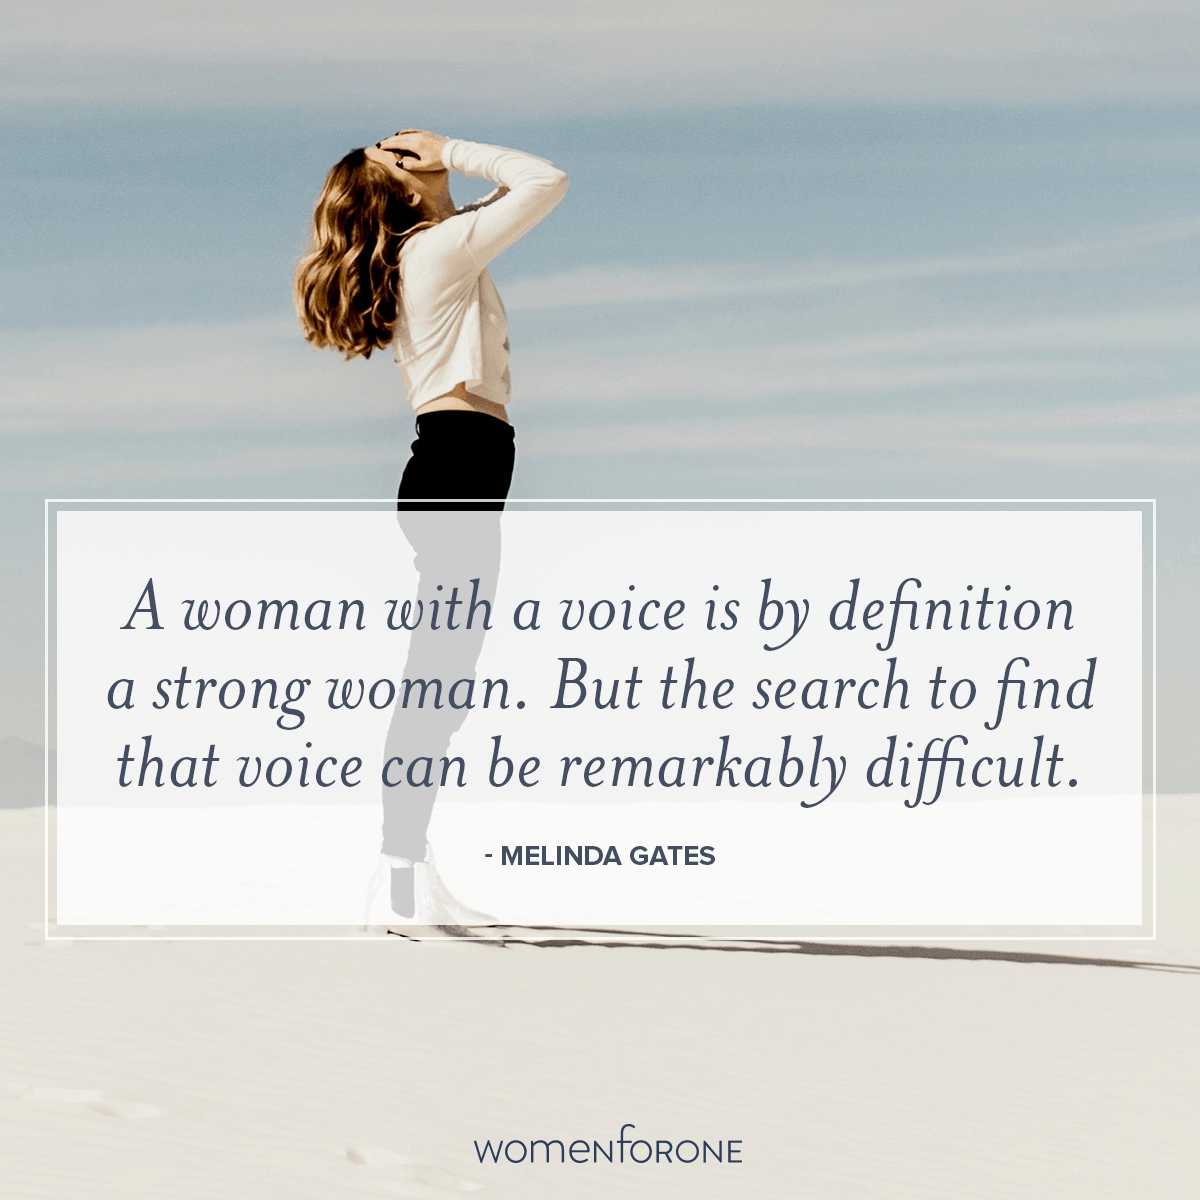 A woman with a voice is by definition a strong woman. But the search to find that voice can be remarkably difficult. - Melinda Gates